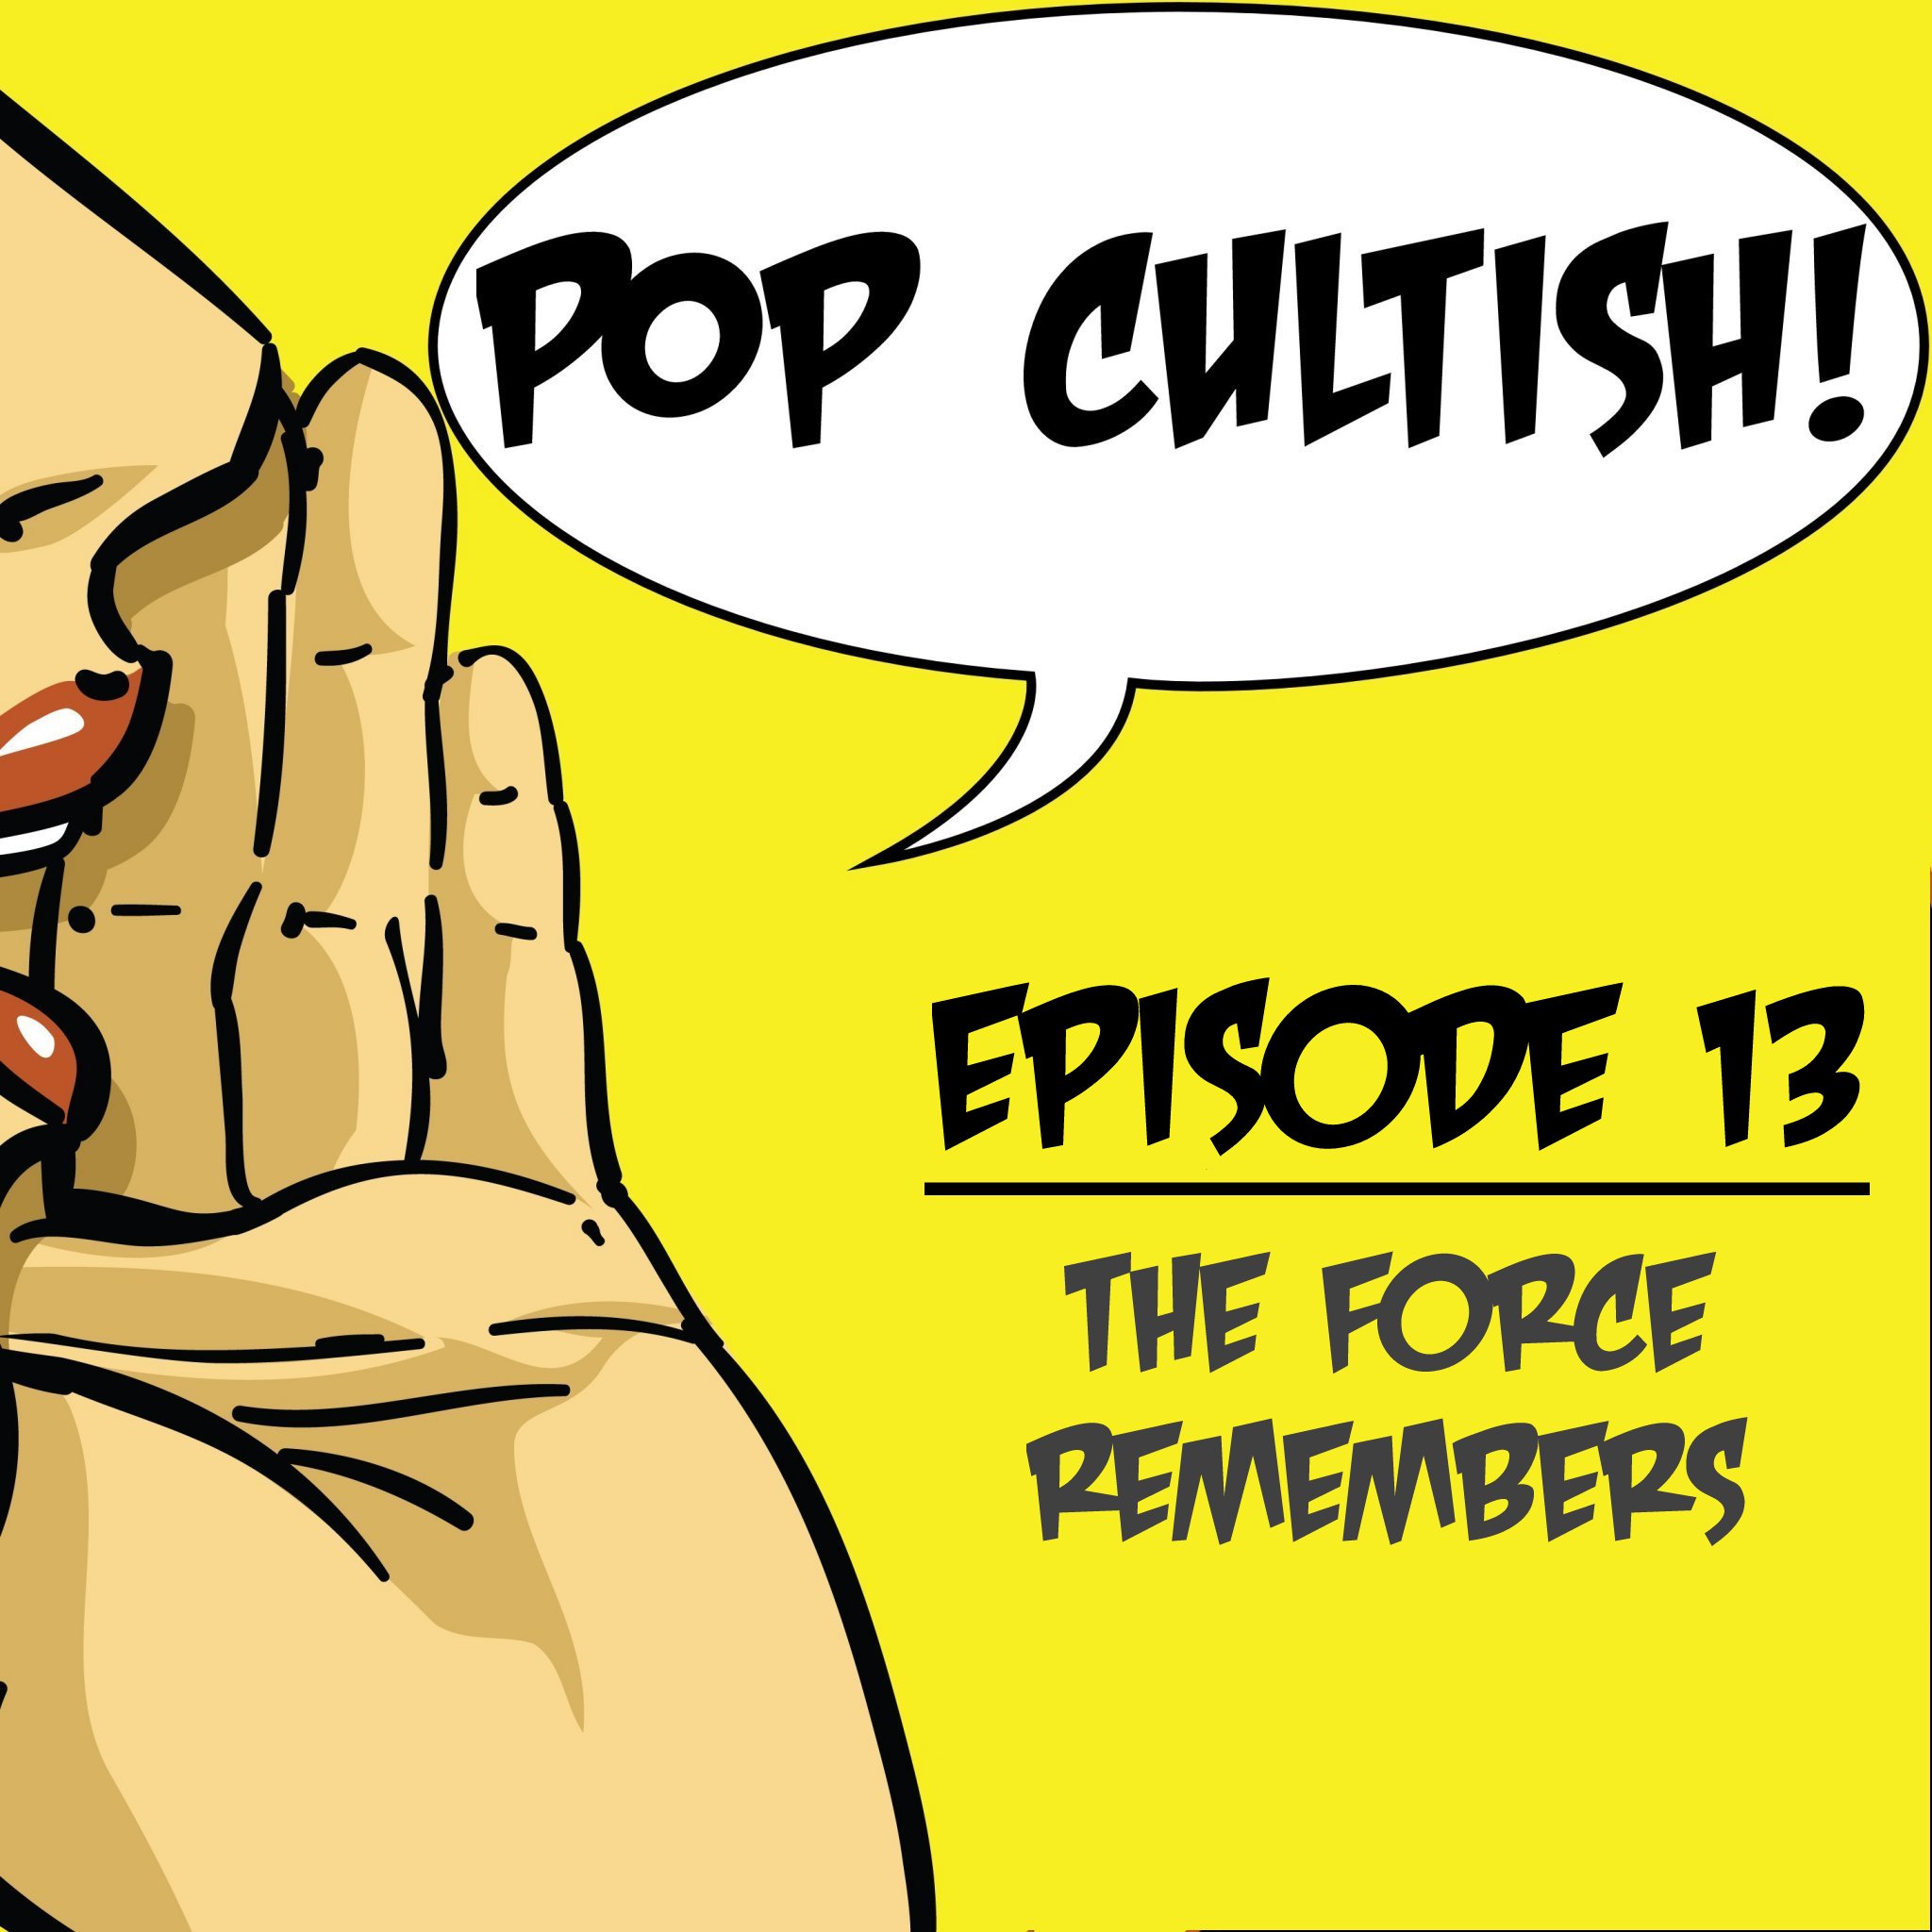 Episode 13 - The Force Remembers